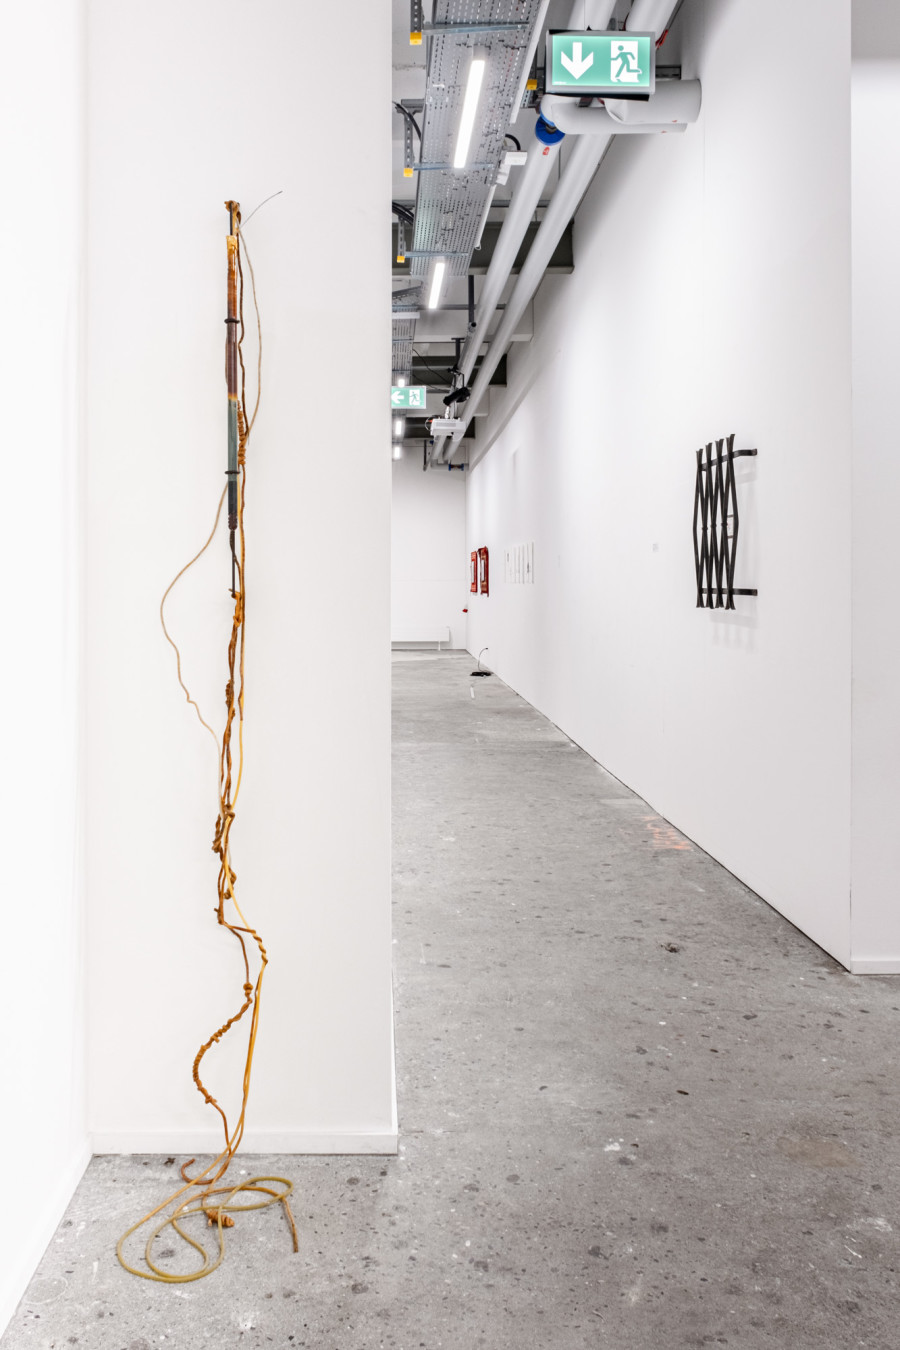 Exhibition View Group Show «Zahltag; view on Matheline Marmy, Saturate (Displacement), 2022, glass tube, water, copper oxide, iron oxide, steel wire, patinated steel, 80 x 10 cm» at Le Commun, Geneva, 2024 / Photo: Daniel Leal / Courtesy: Spielact Festival